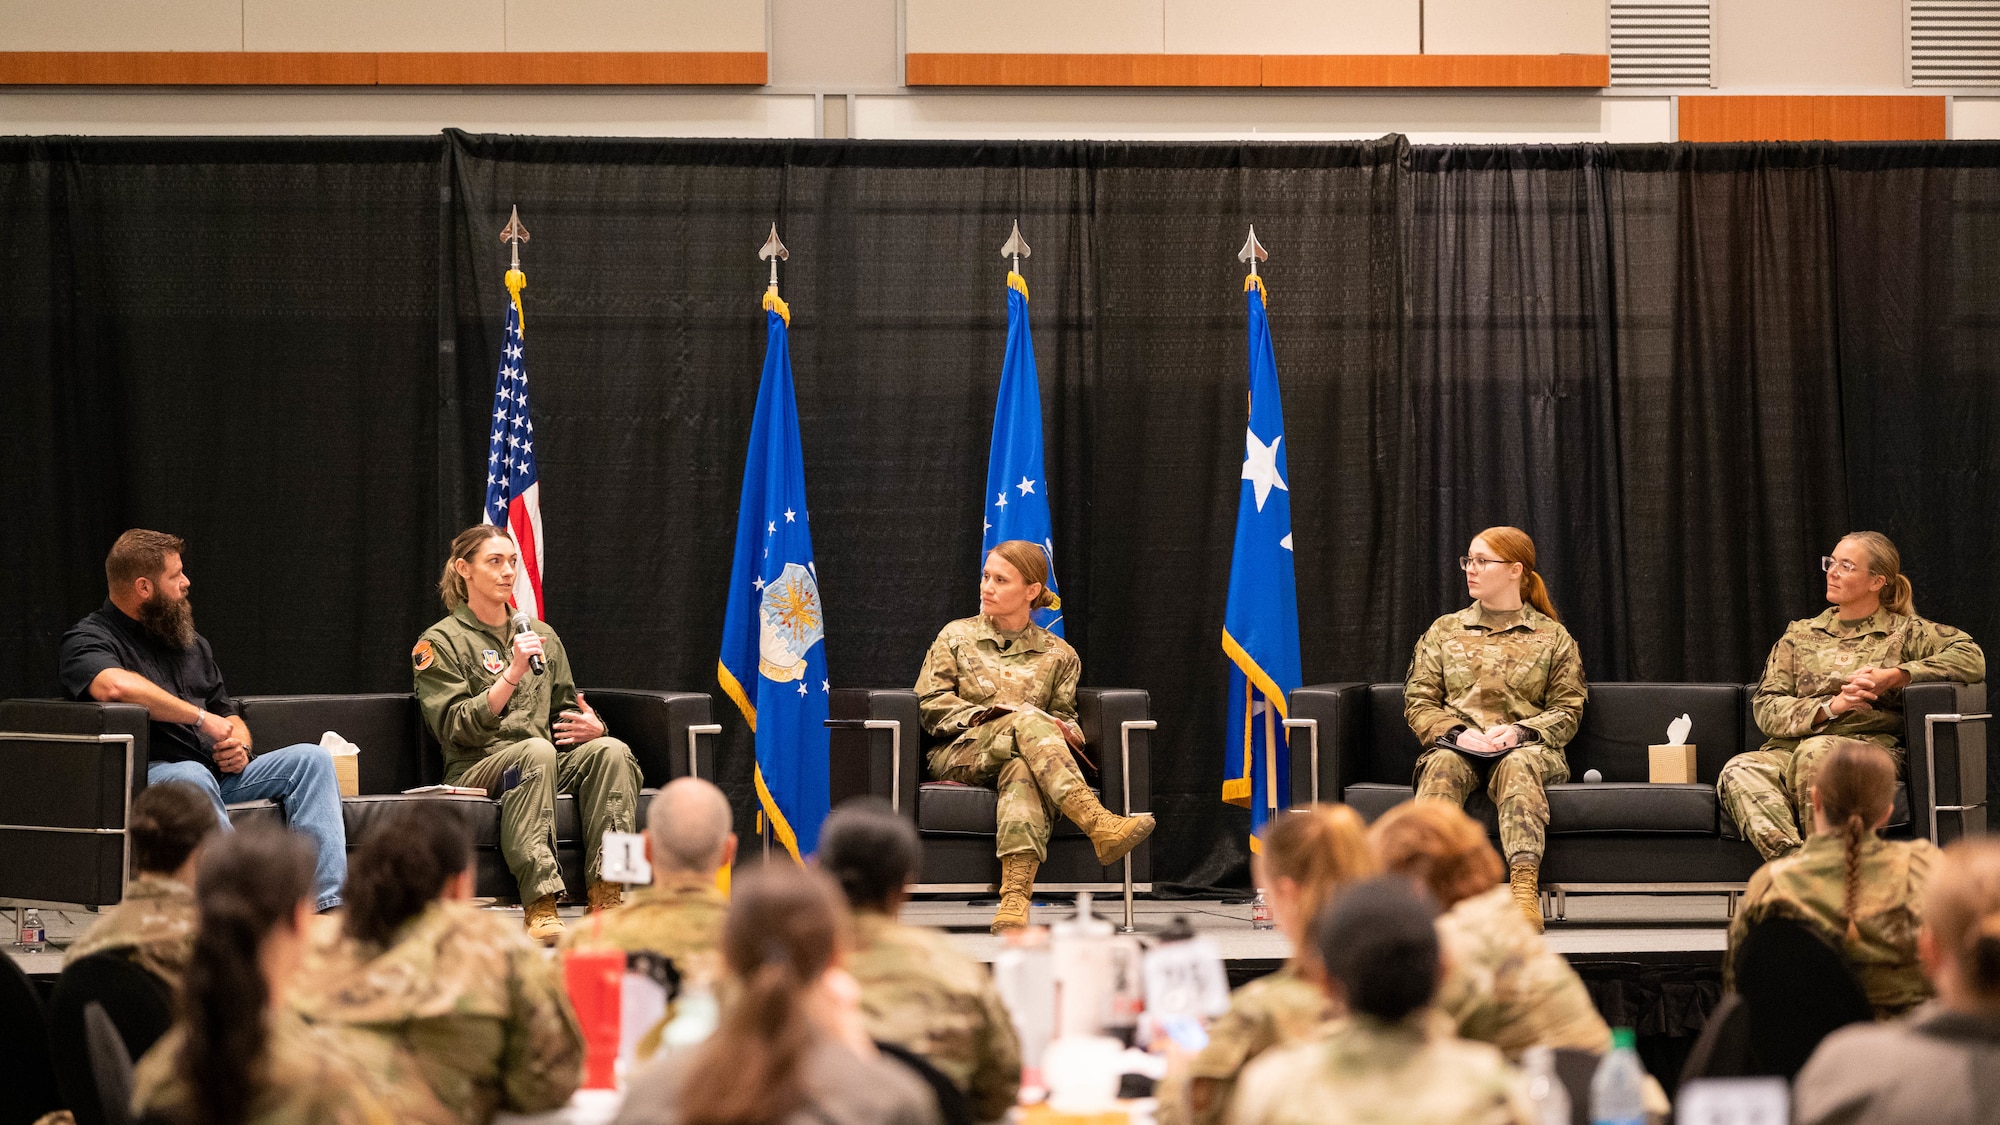 A panel of Airmen discuss allyship during the 2023 Air Force Global Strike Command Women's Leadership Symposium in Shreveport, La., July 25, 2023. Airmen and Guardians from AFGSC bases participated in the symposium virtually or in-person, discussing the importance of equity in leadership at all levels, and getting to hear from speakers and panels about the successes achieved and challenges experienced by women in the military. (U.S. Air Force photo by Capt. Joshua Thompson)